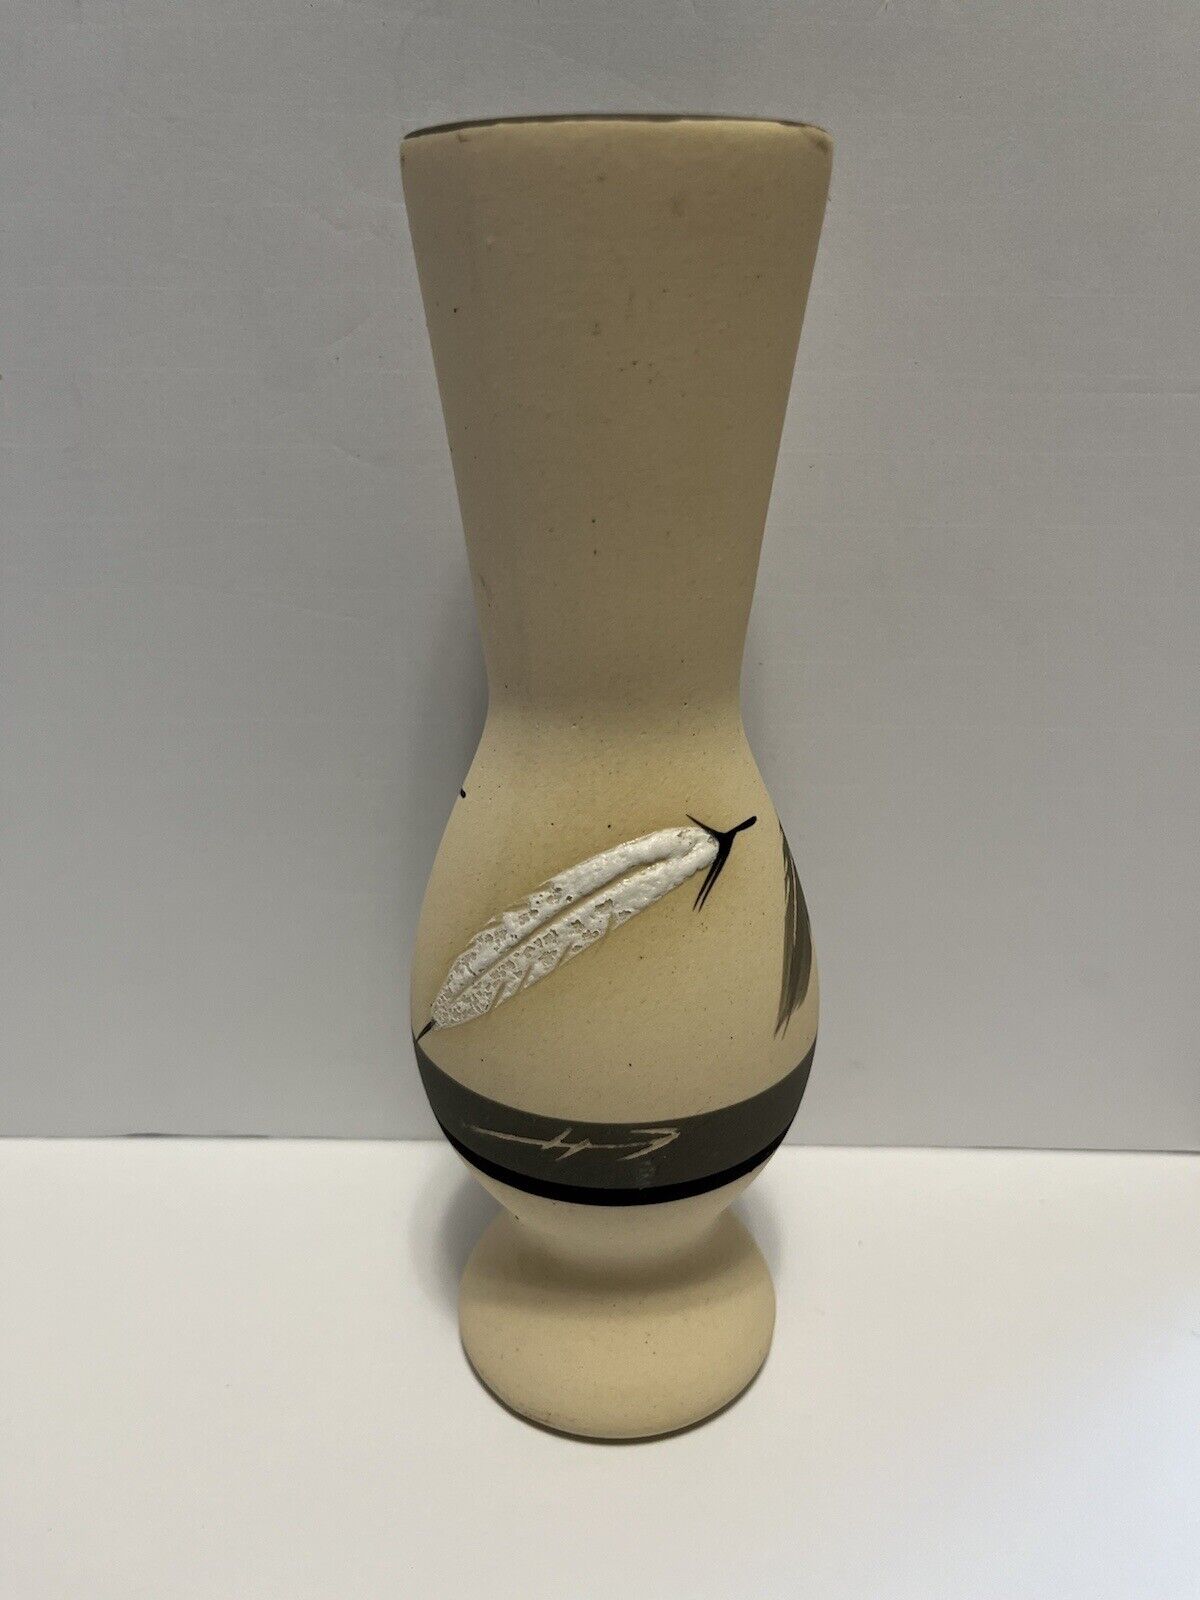 Artist Grey Feather Hand Painted Textured Ceramic Art Pottery Feather Vase 1995